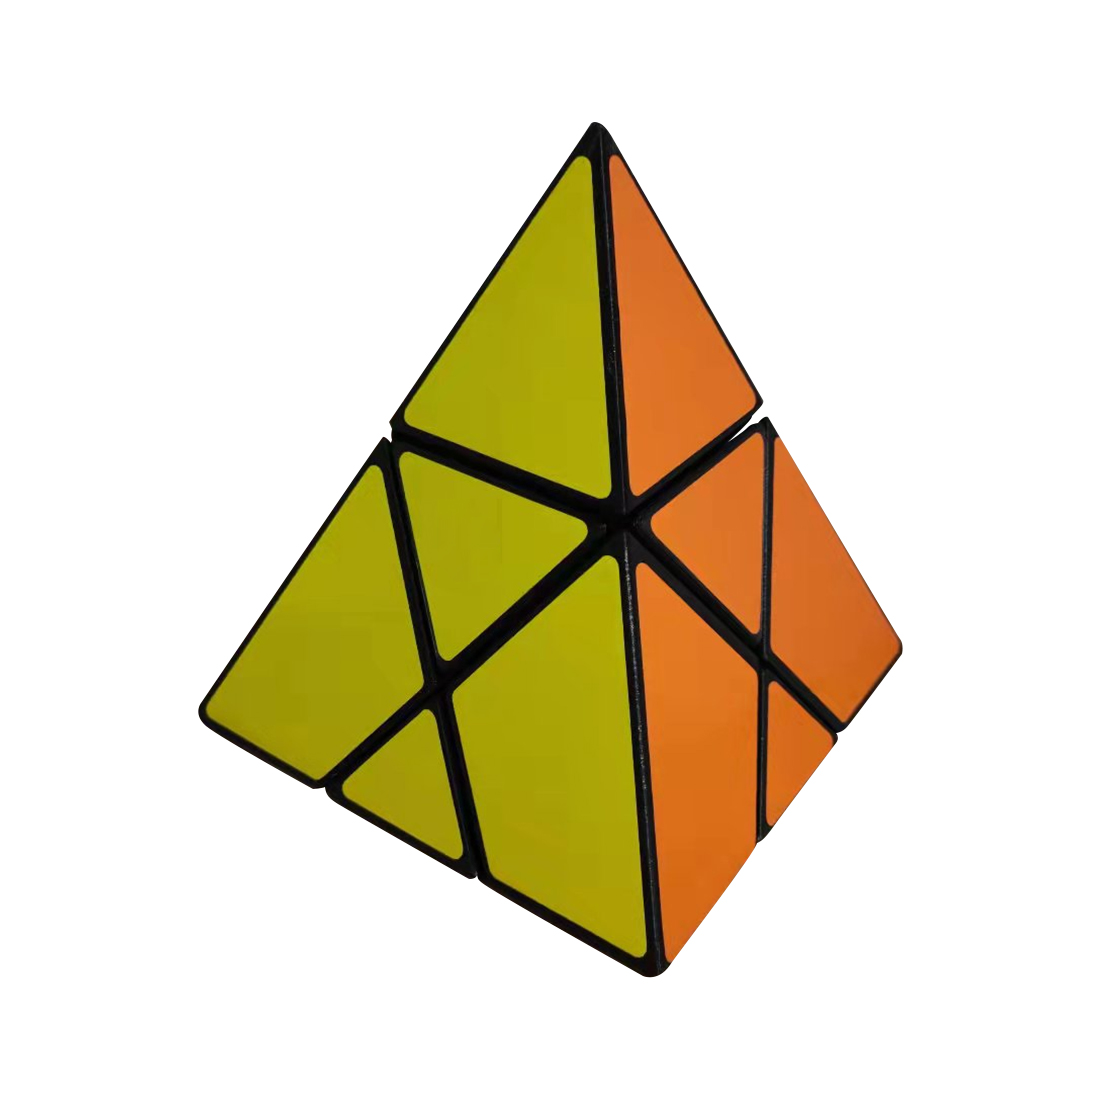 3x3 Super Pentahedron Pyramid Tower Cube（Fisher Based）